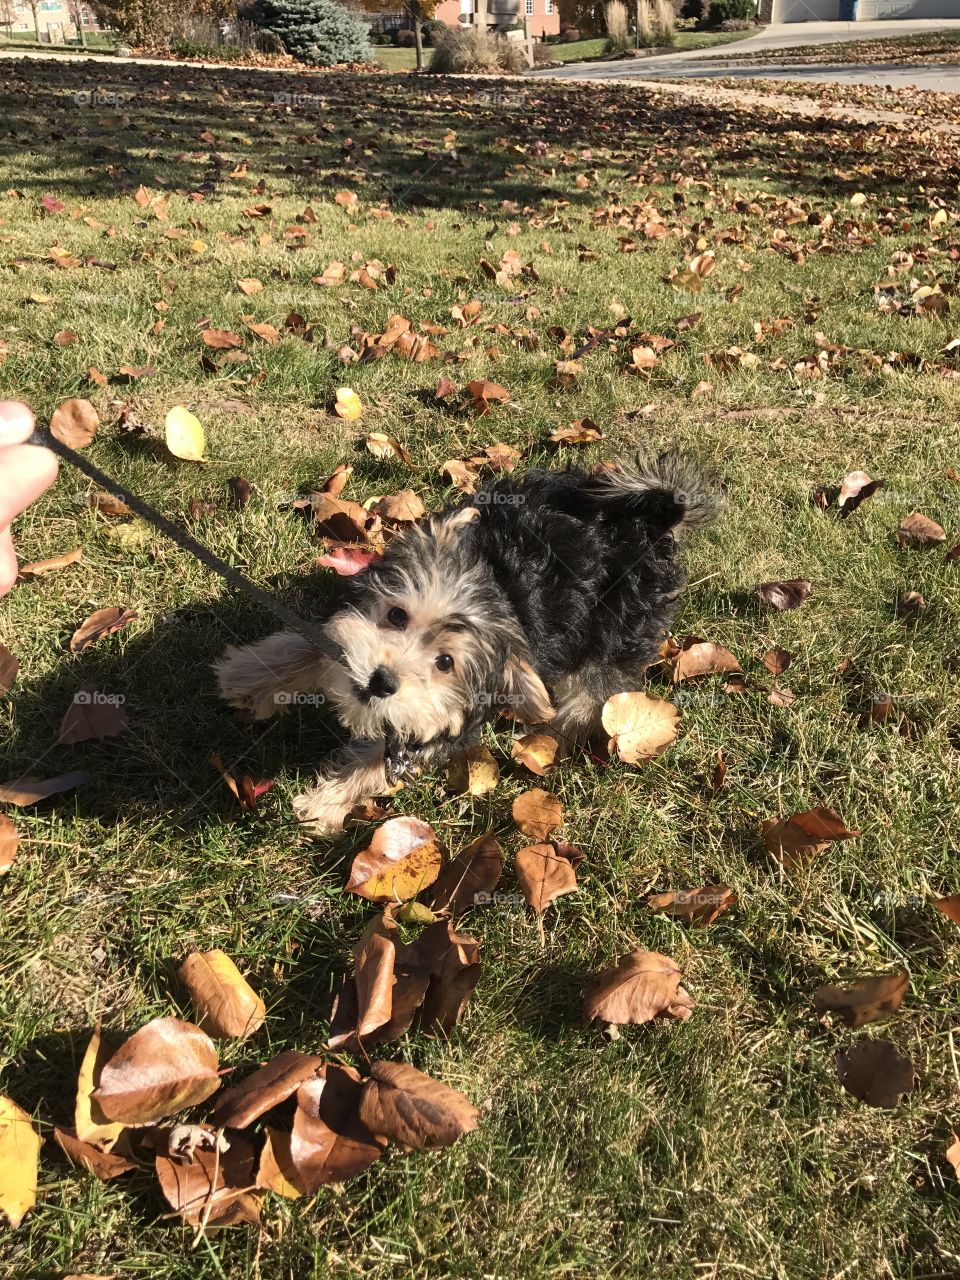 New puppy, yorkie bichon breed being welcomed to the family and out for his first walk on a fall afternoon